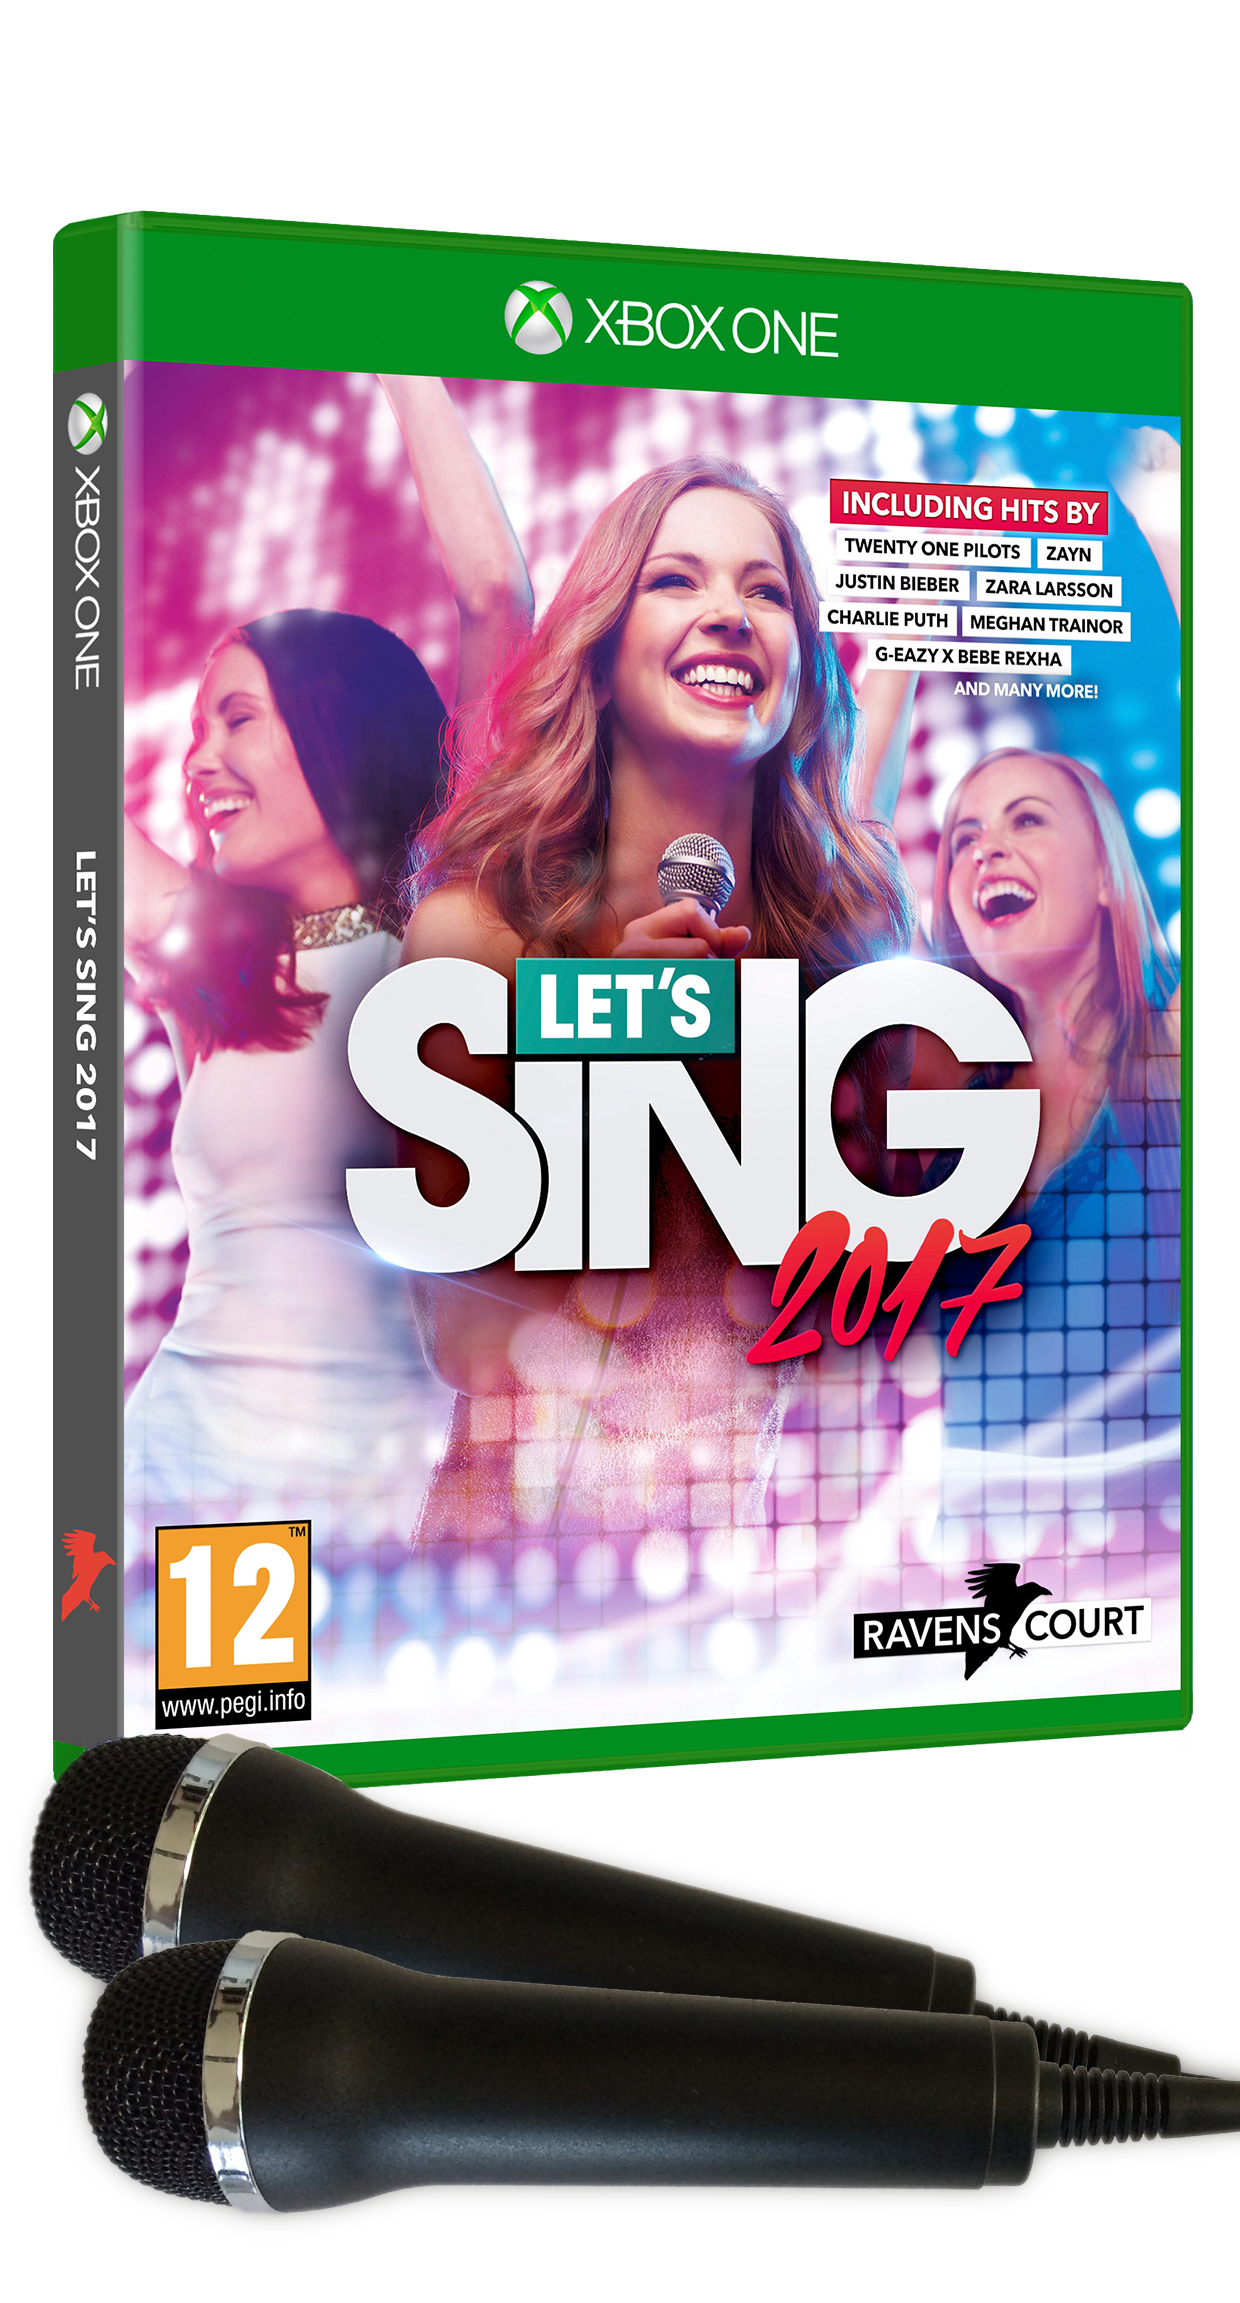 let's sing xbox one microphone